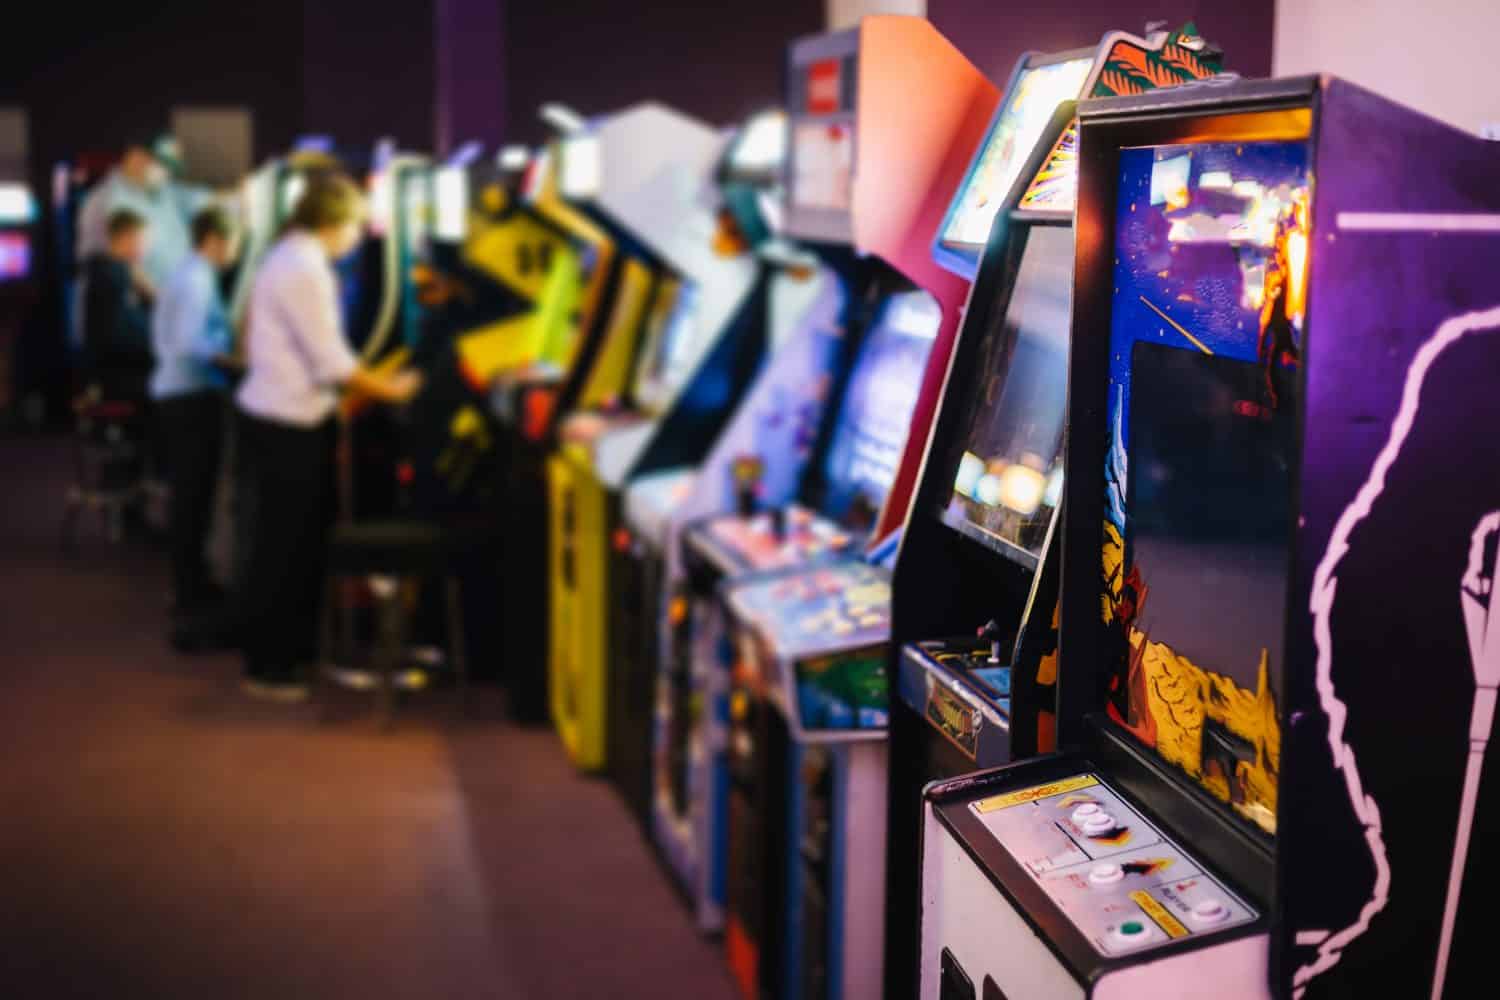 Old Vintage Arcade Games in a dark room and players playing video games in the background